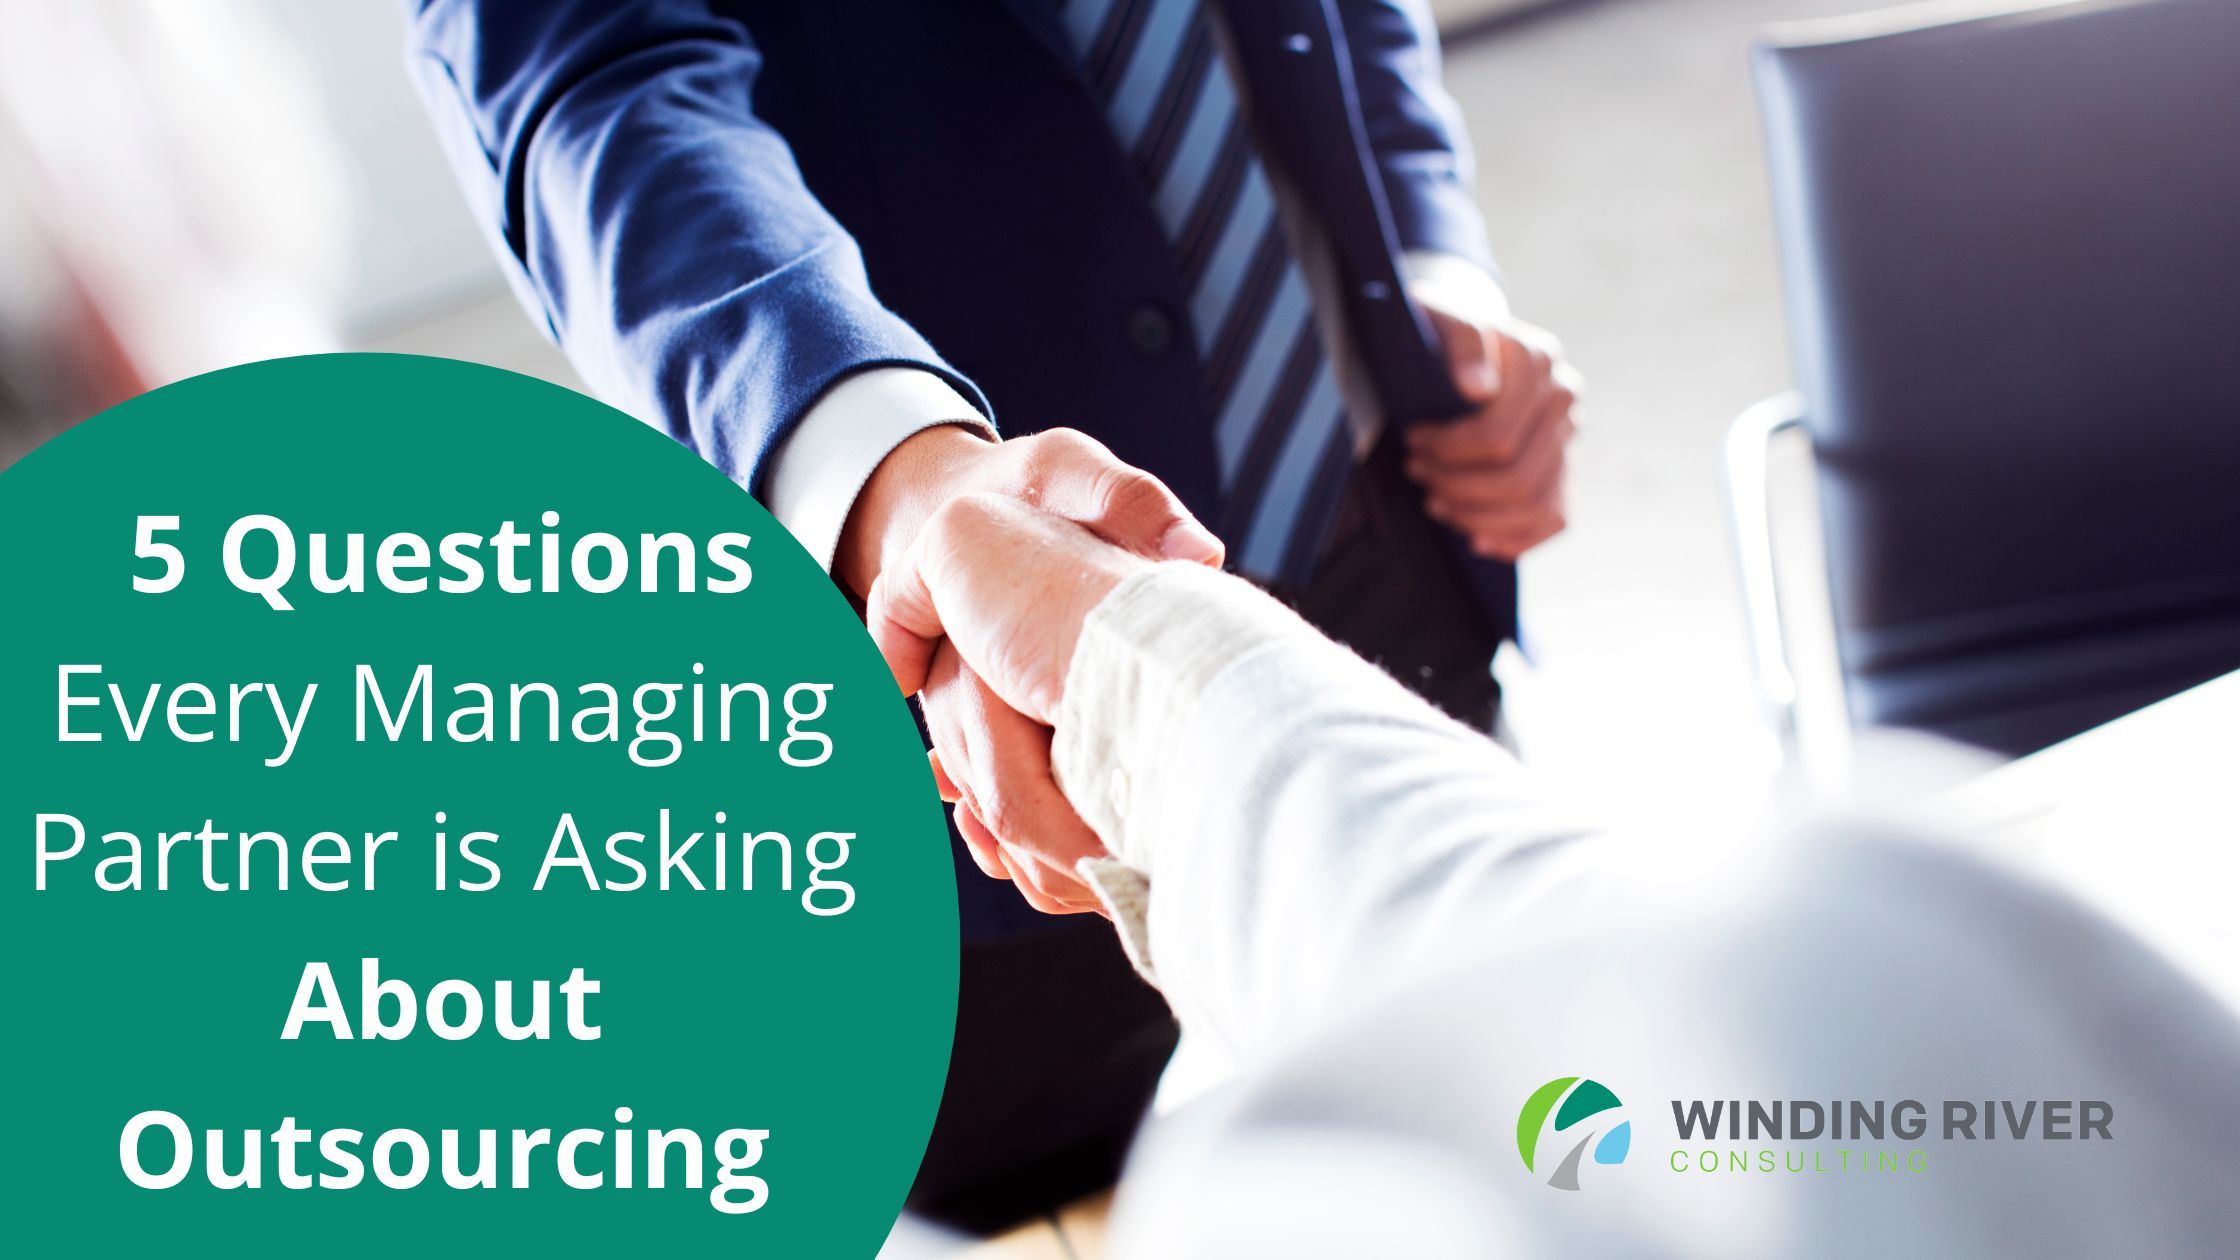 5 Questions Every Managing Partner is Asking About Outsourcing